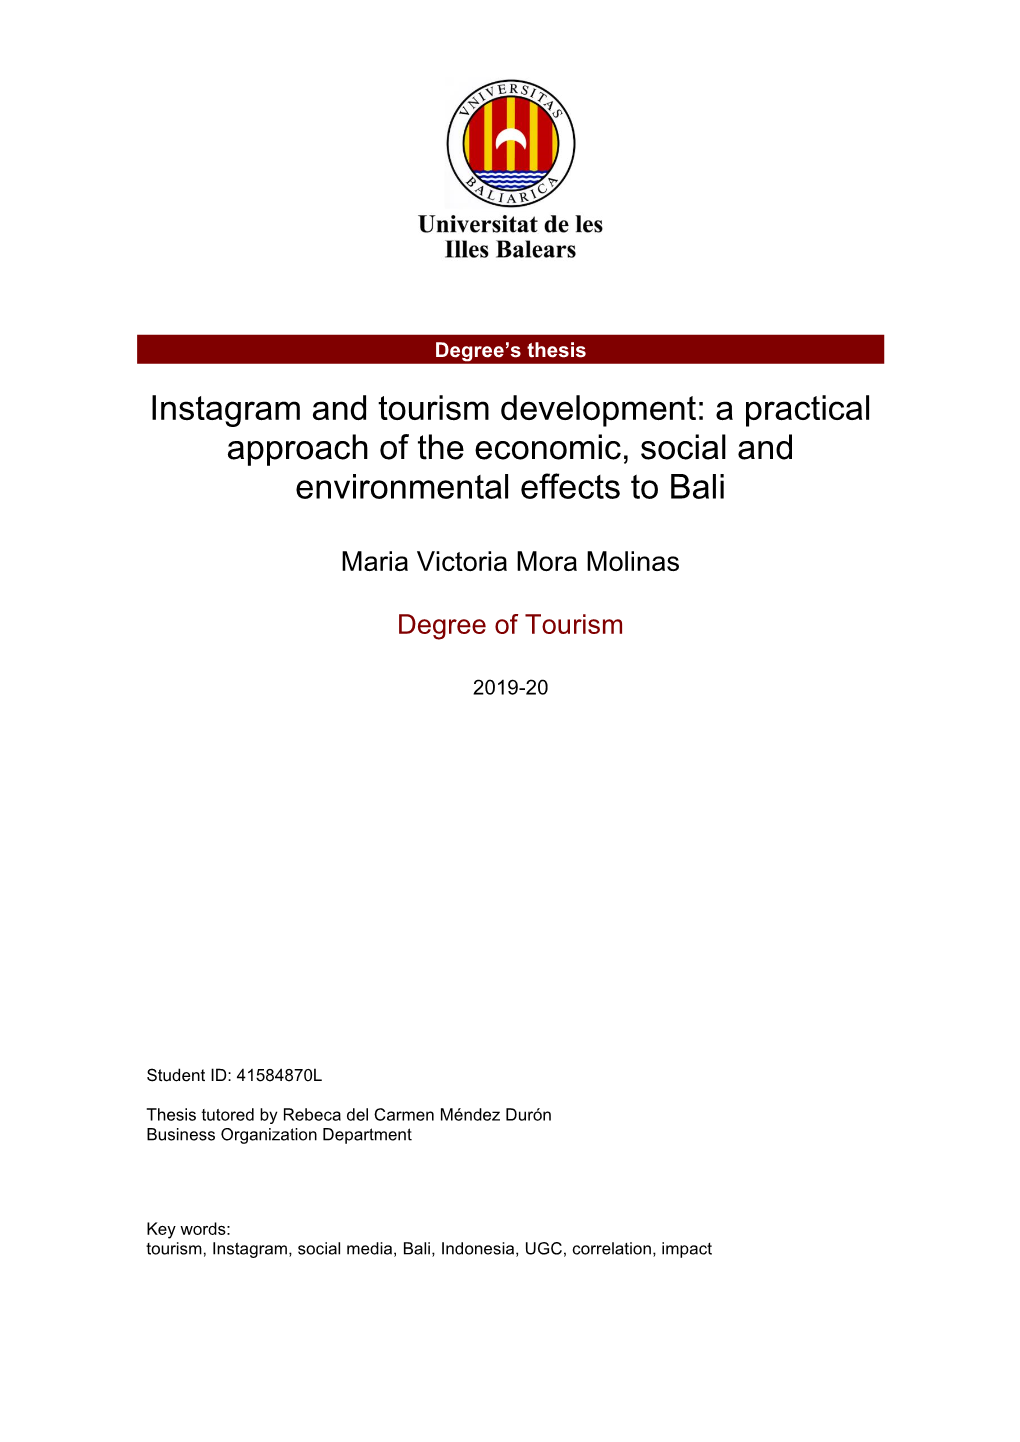 Instagram and Tourism Development: a Practical Approach of the Economic, Social and Environmental Effects to Bali